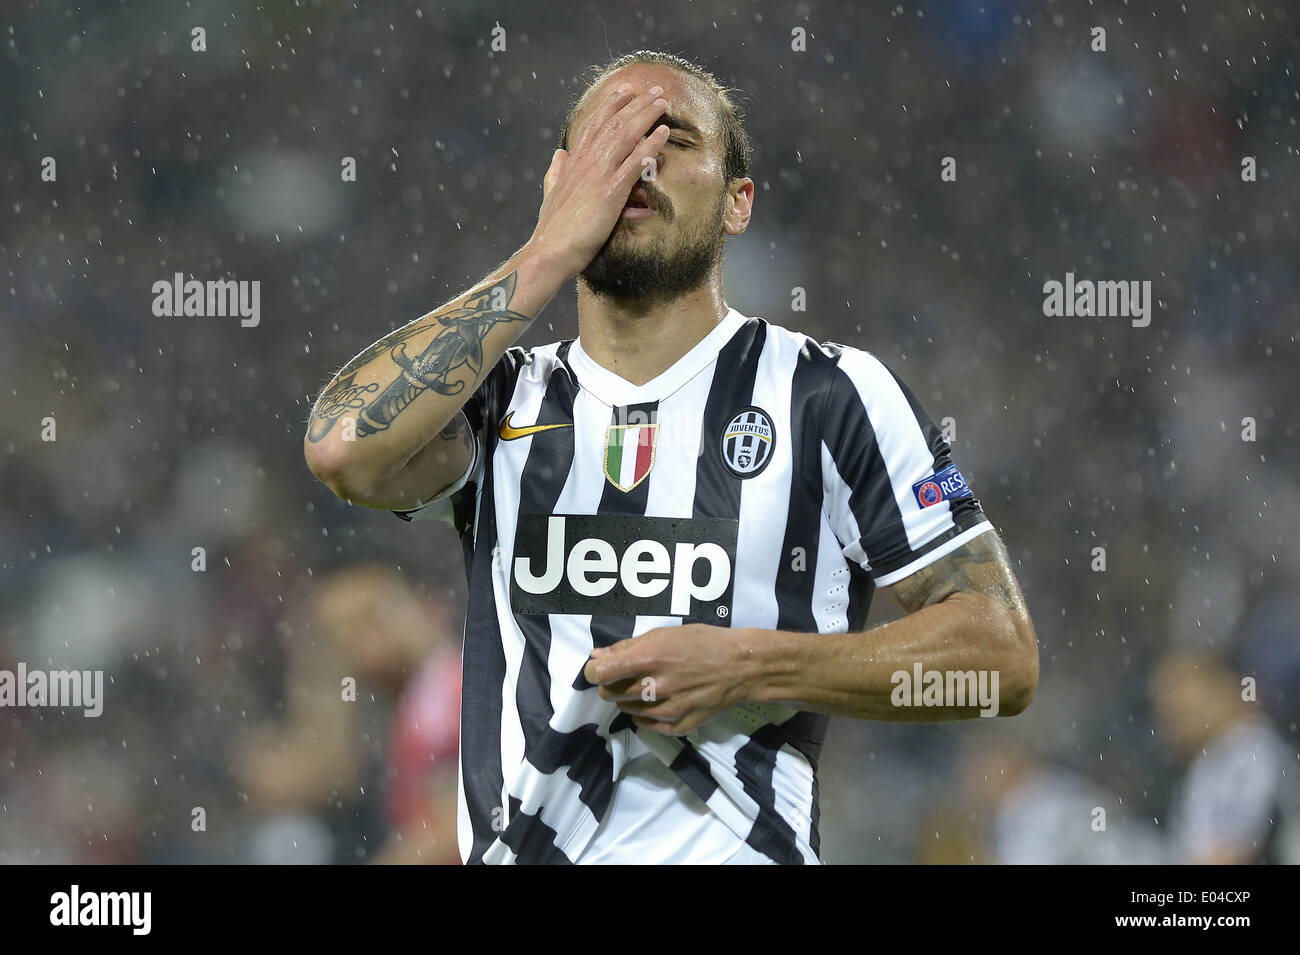 Turin, Italy. 1st May, 2014. Pablo Osvaldo of Juventus reacts during the semifinal match against Benfica at the 2013/2014 UEFA Europa League in Turin, Italy, May 1, 2014. The match ended with a 0-0 tie and Benfica qualified to final with 2-1 on aggregate. Credit:  Alberto Lingria/Xinhua/Alamy Live News Stock Photo